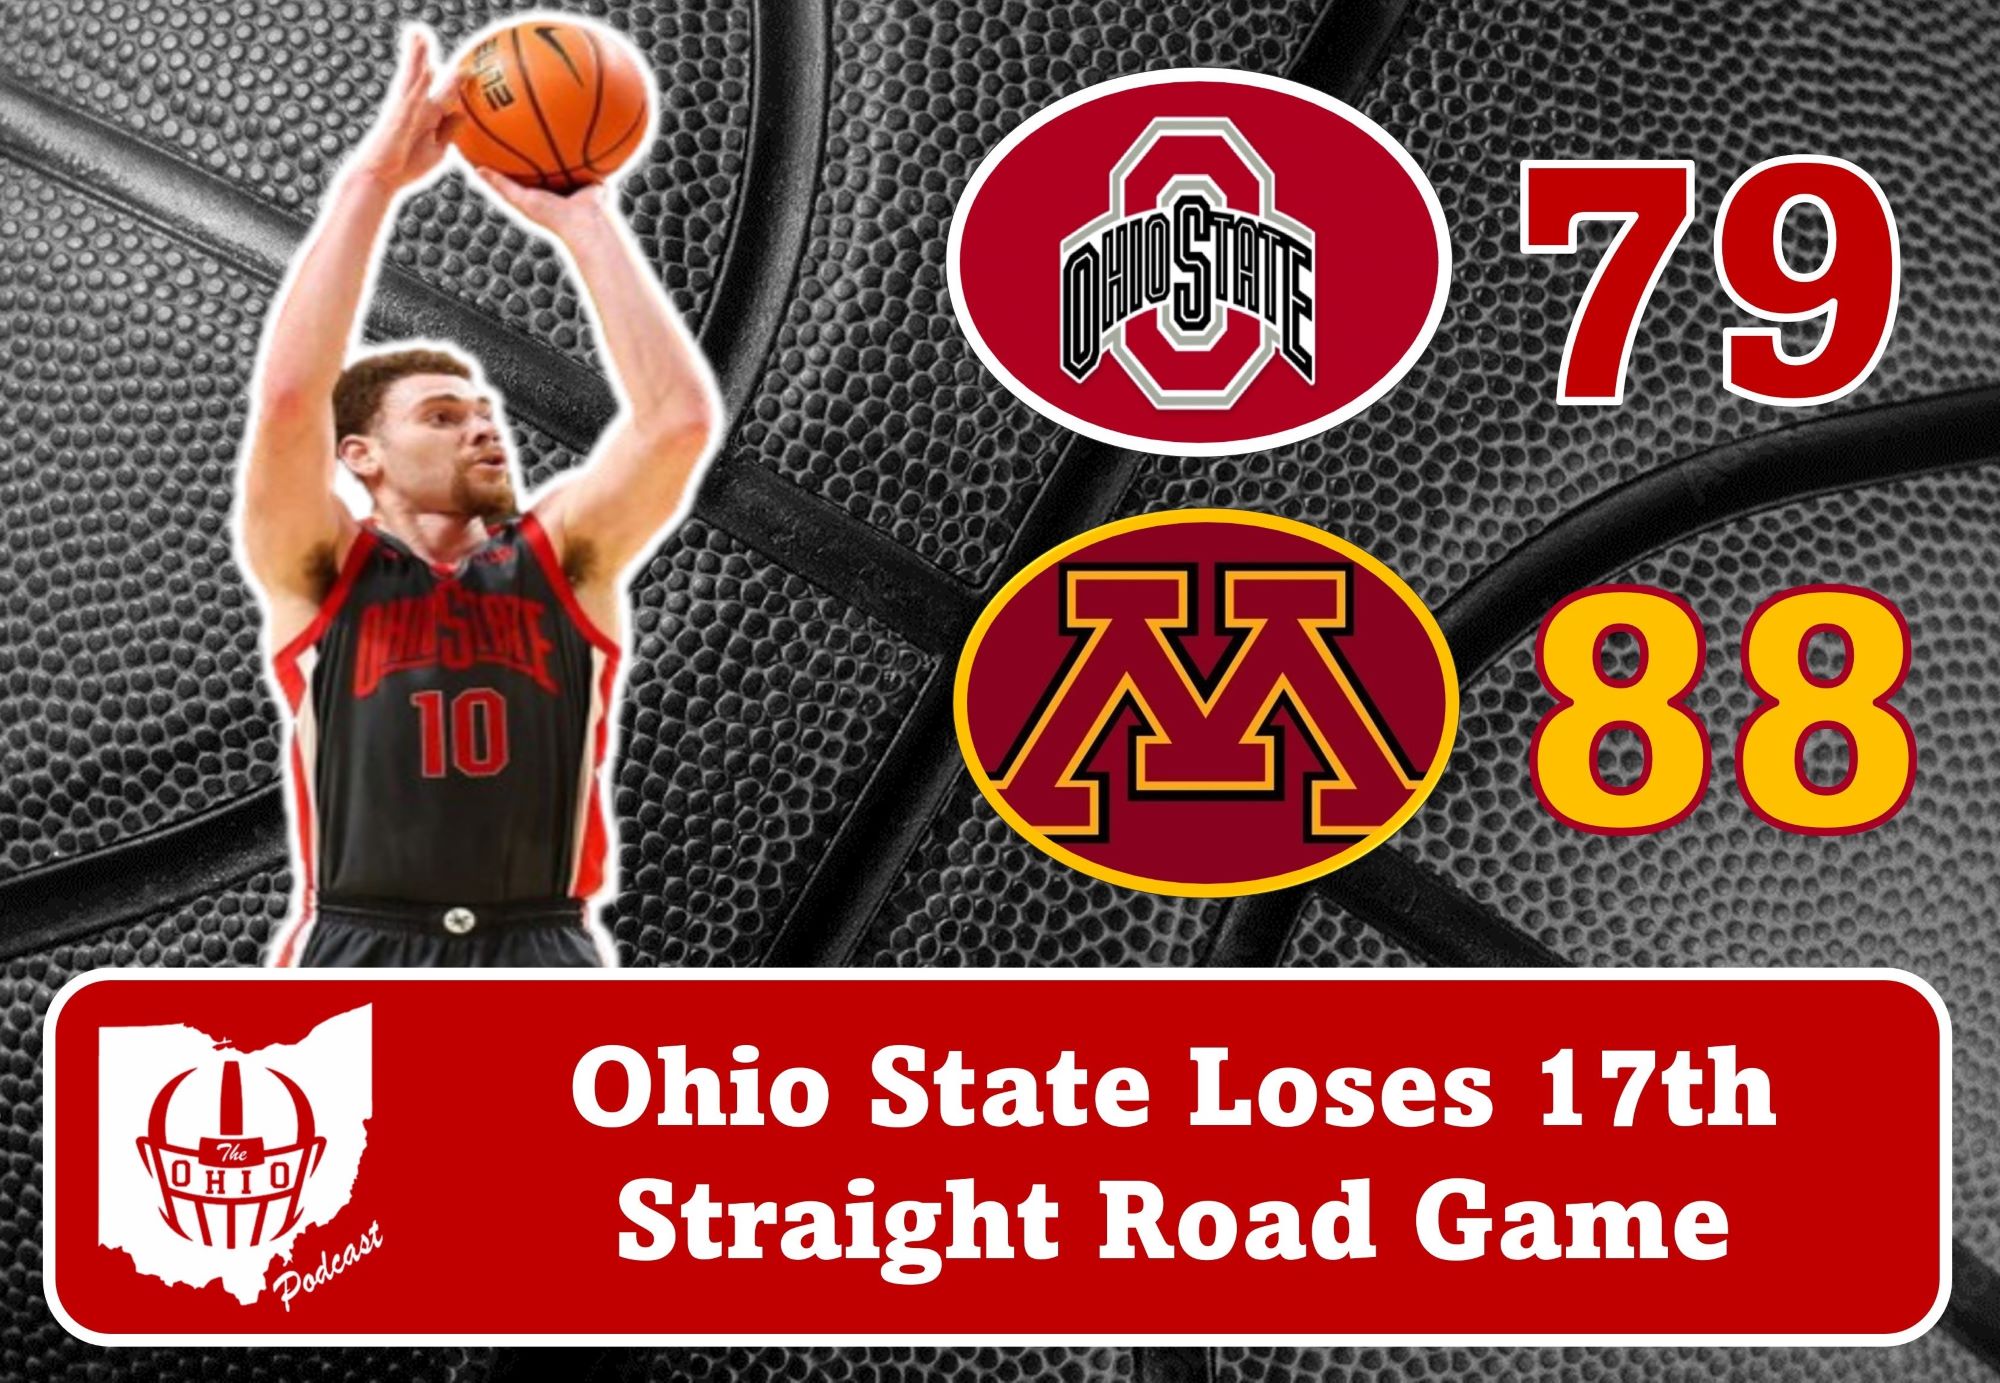 Despite Jake Diebler being at the helm, Ohio State loses a record 17th consecutive road game